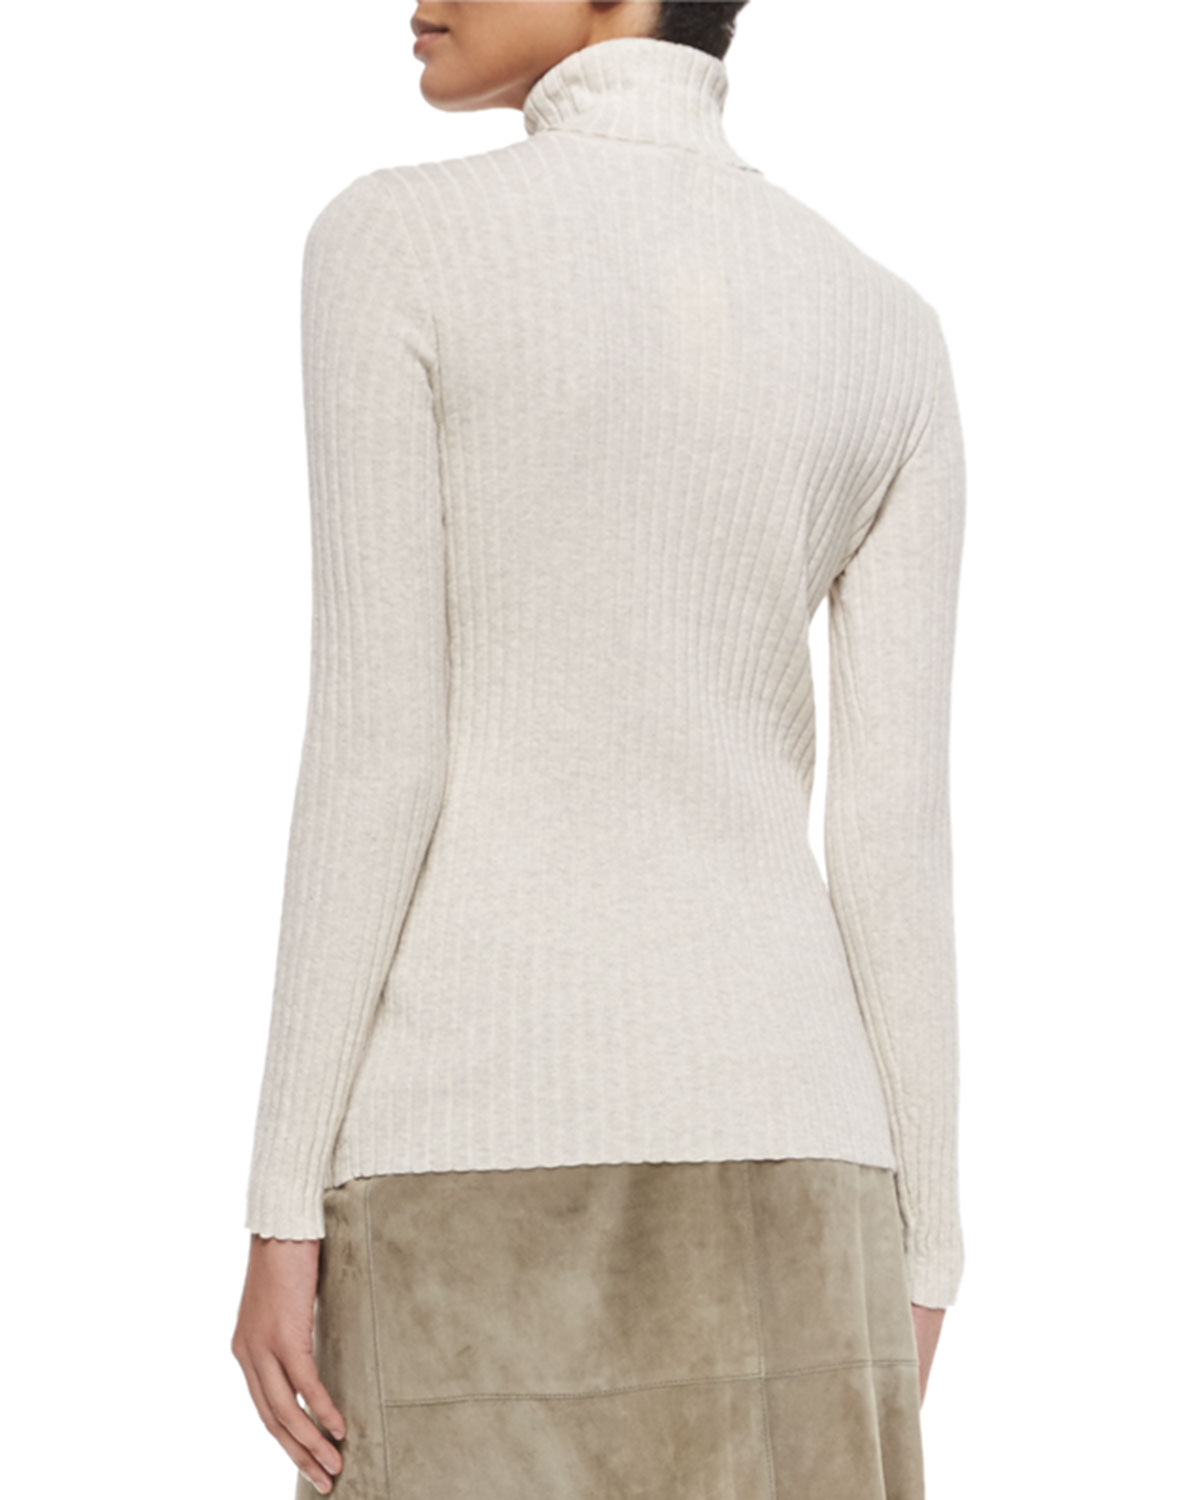 Tory burch Ribbed Turtleneck Sweater in Brown | Lyst